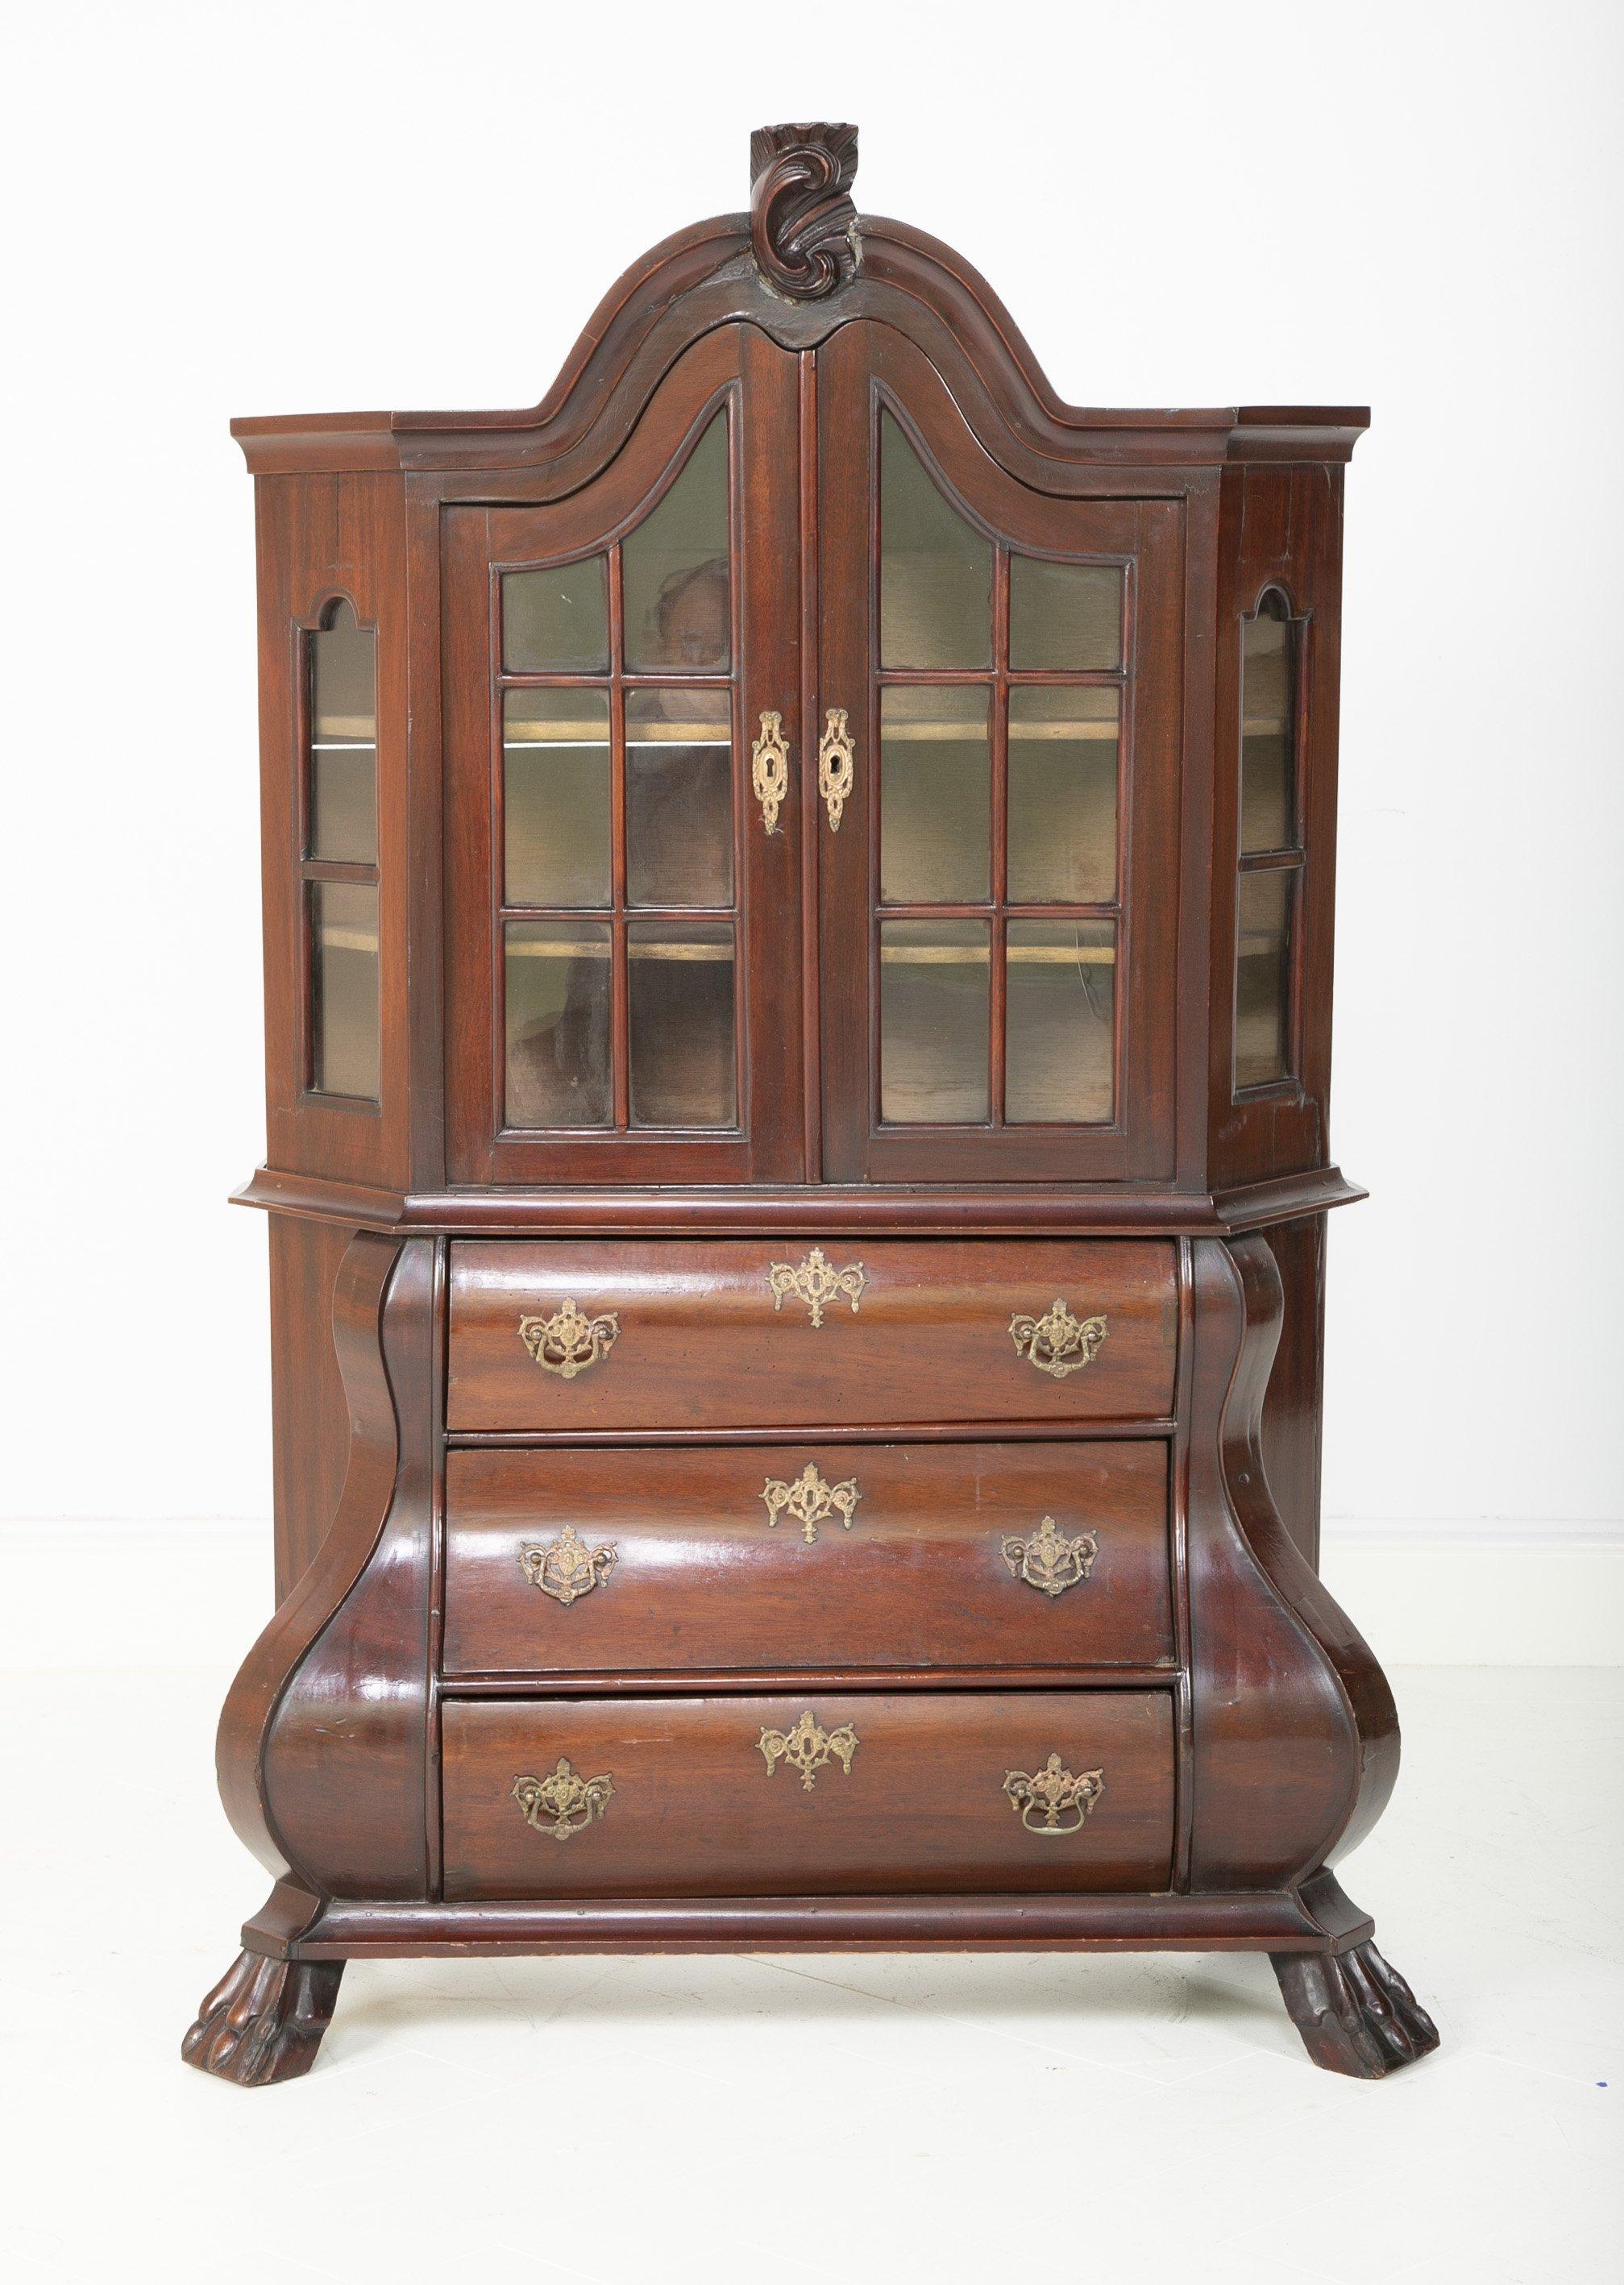 A late 18th-century diminutive Dutch kettle base paw foot bookcase with arched crest and glazed double doors and original pulls, circa 1790.



We are proud of our long-standing partnership with George N Antiques who specializes in fine authentic